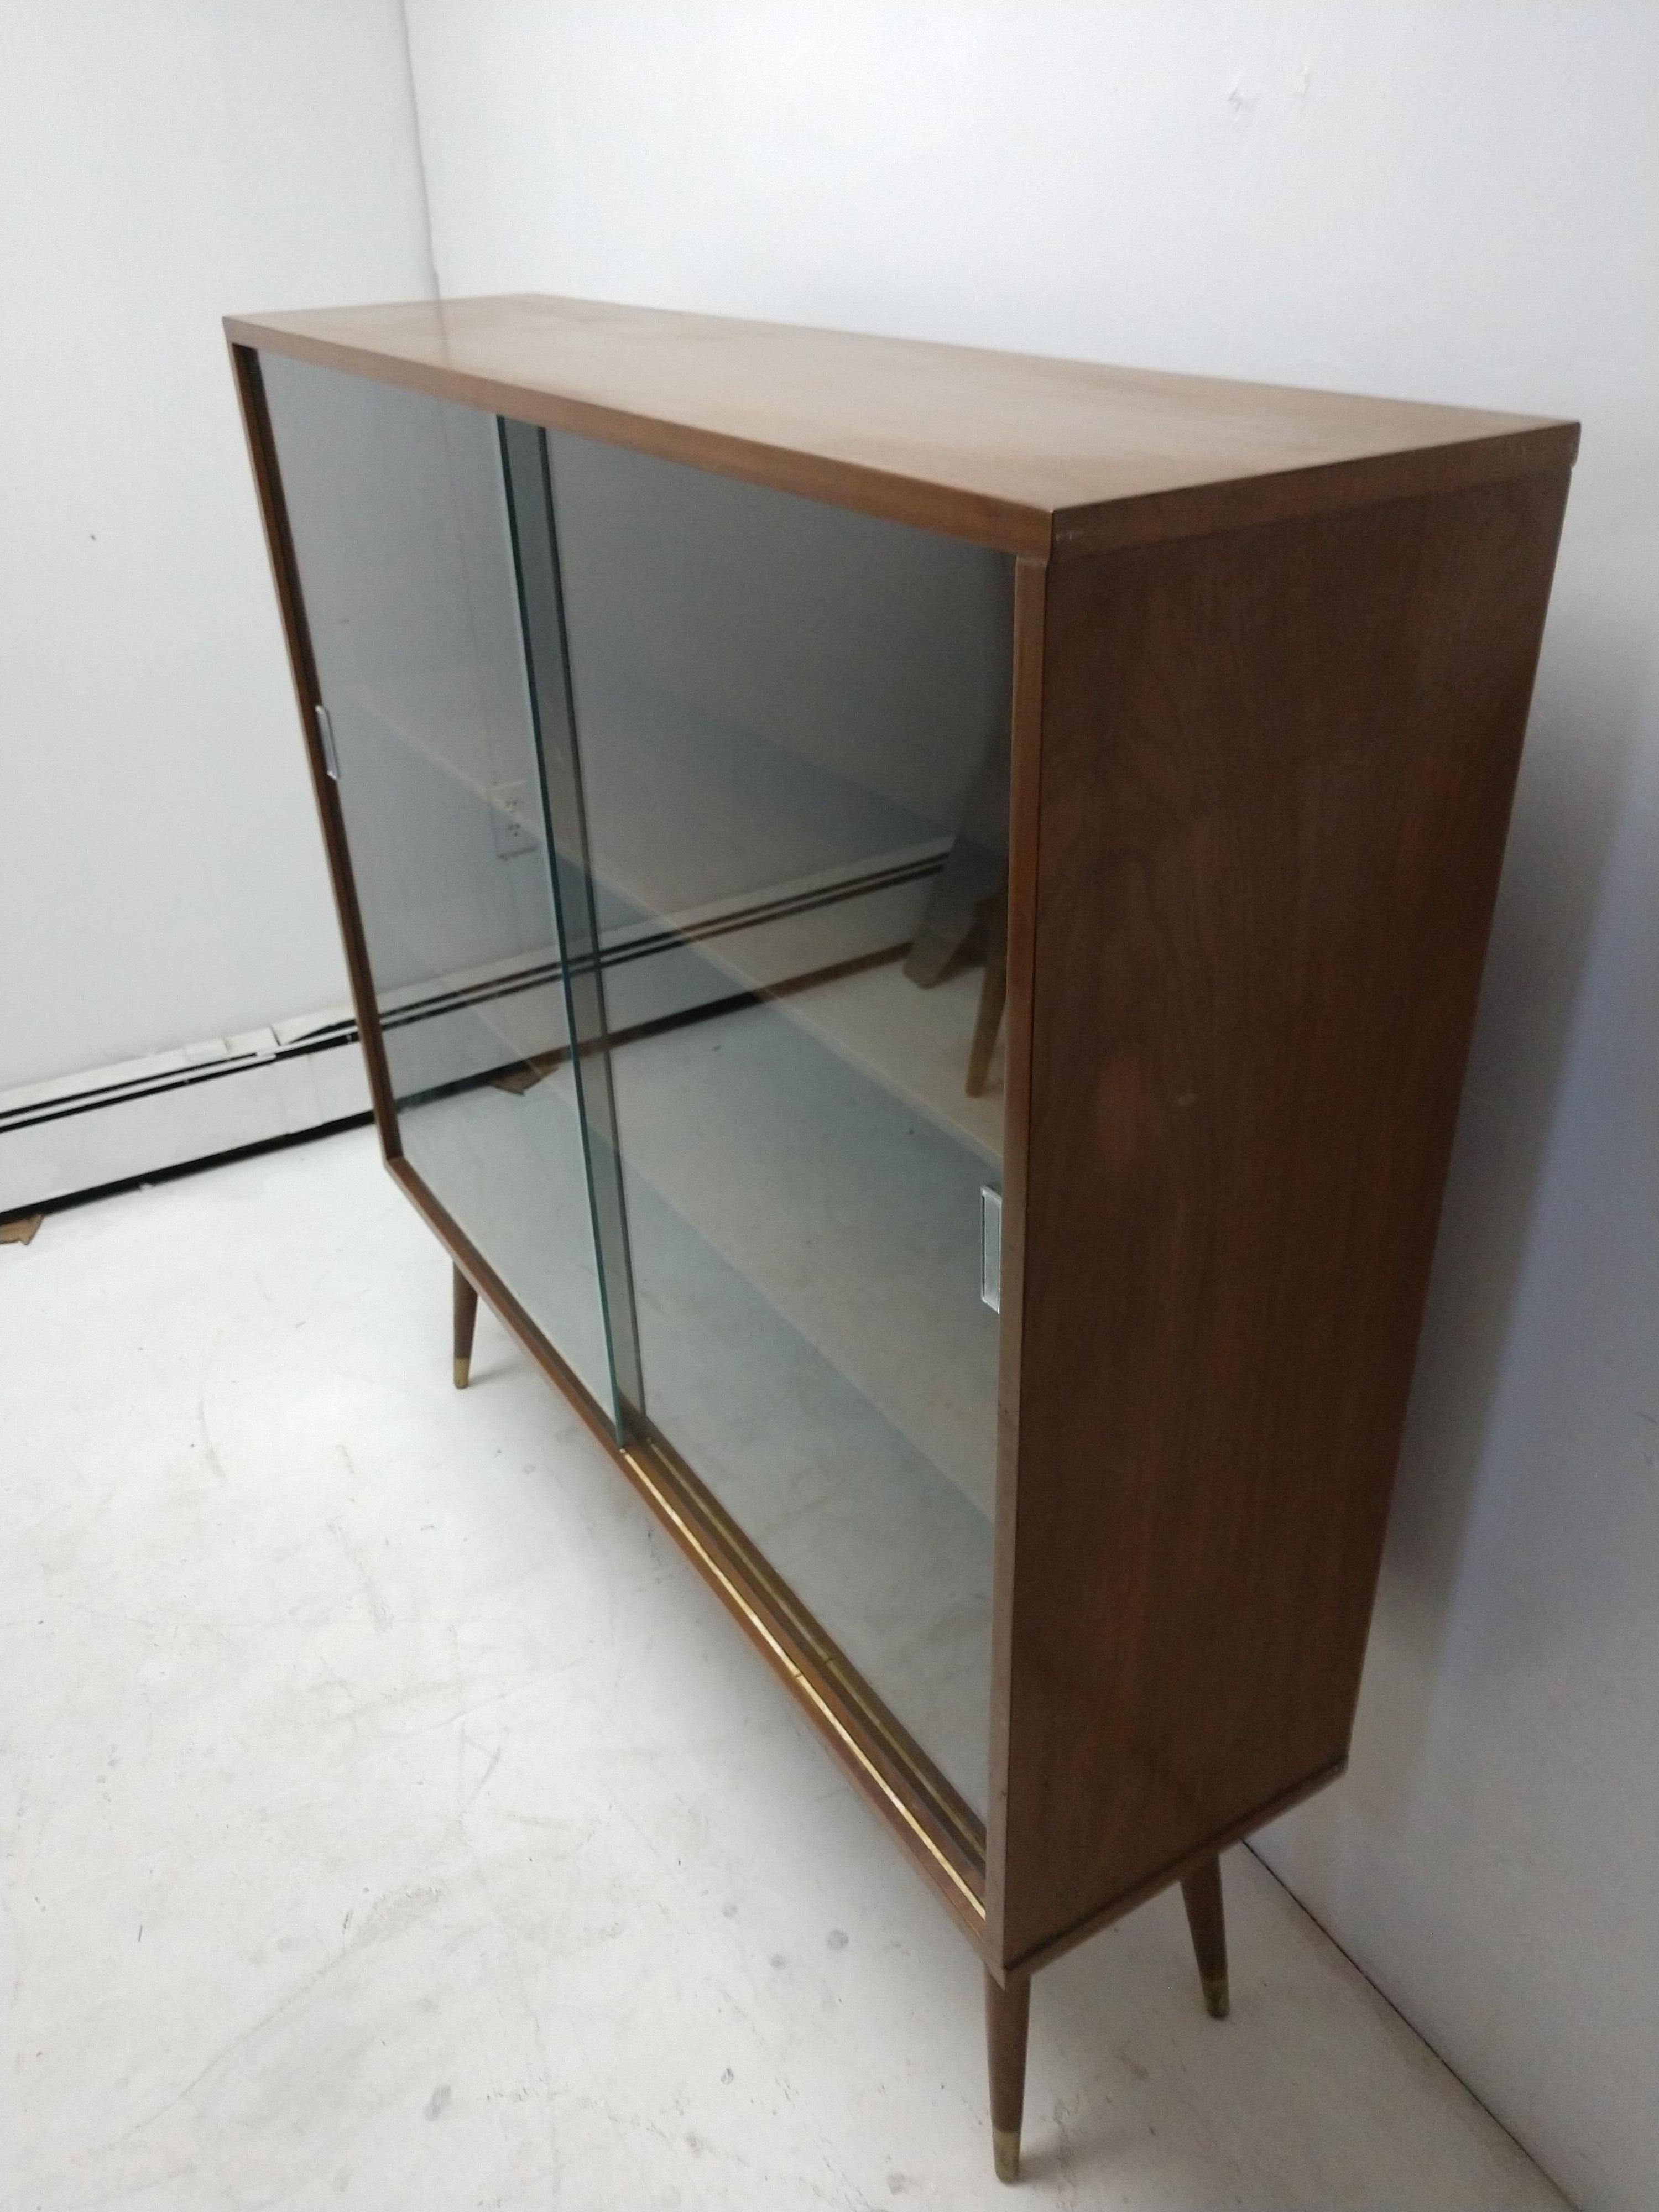 Large midcentury bookcase on splayed legs. Created out of walnut, has two sliding glass doors. In excellent vintage condition. Two adjustable shelves.